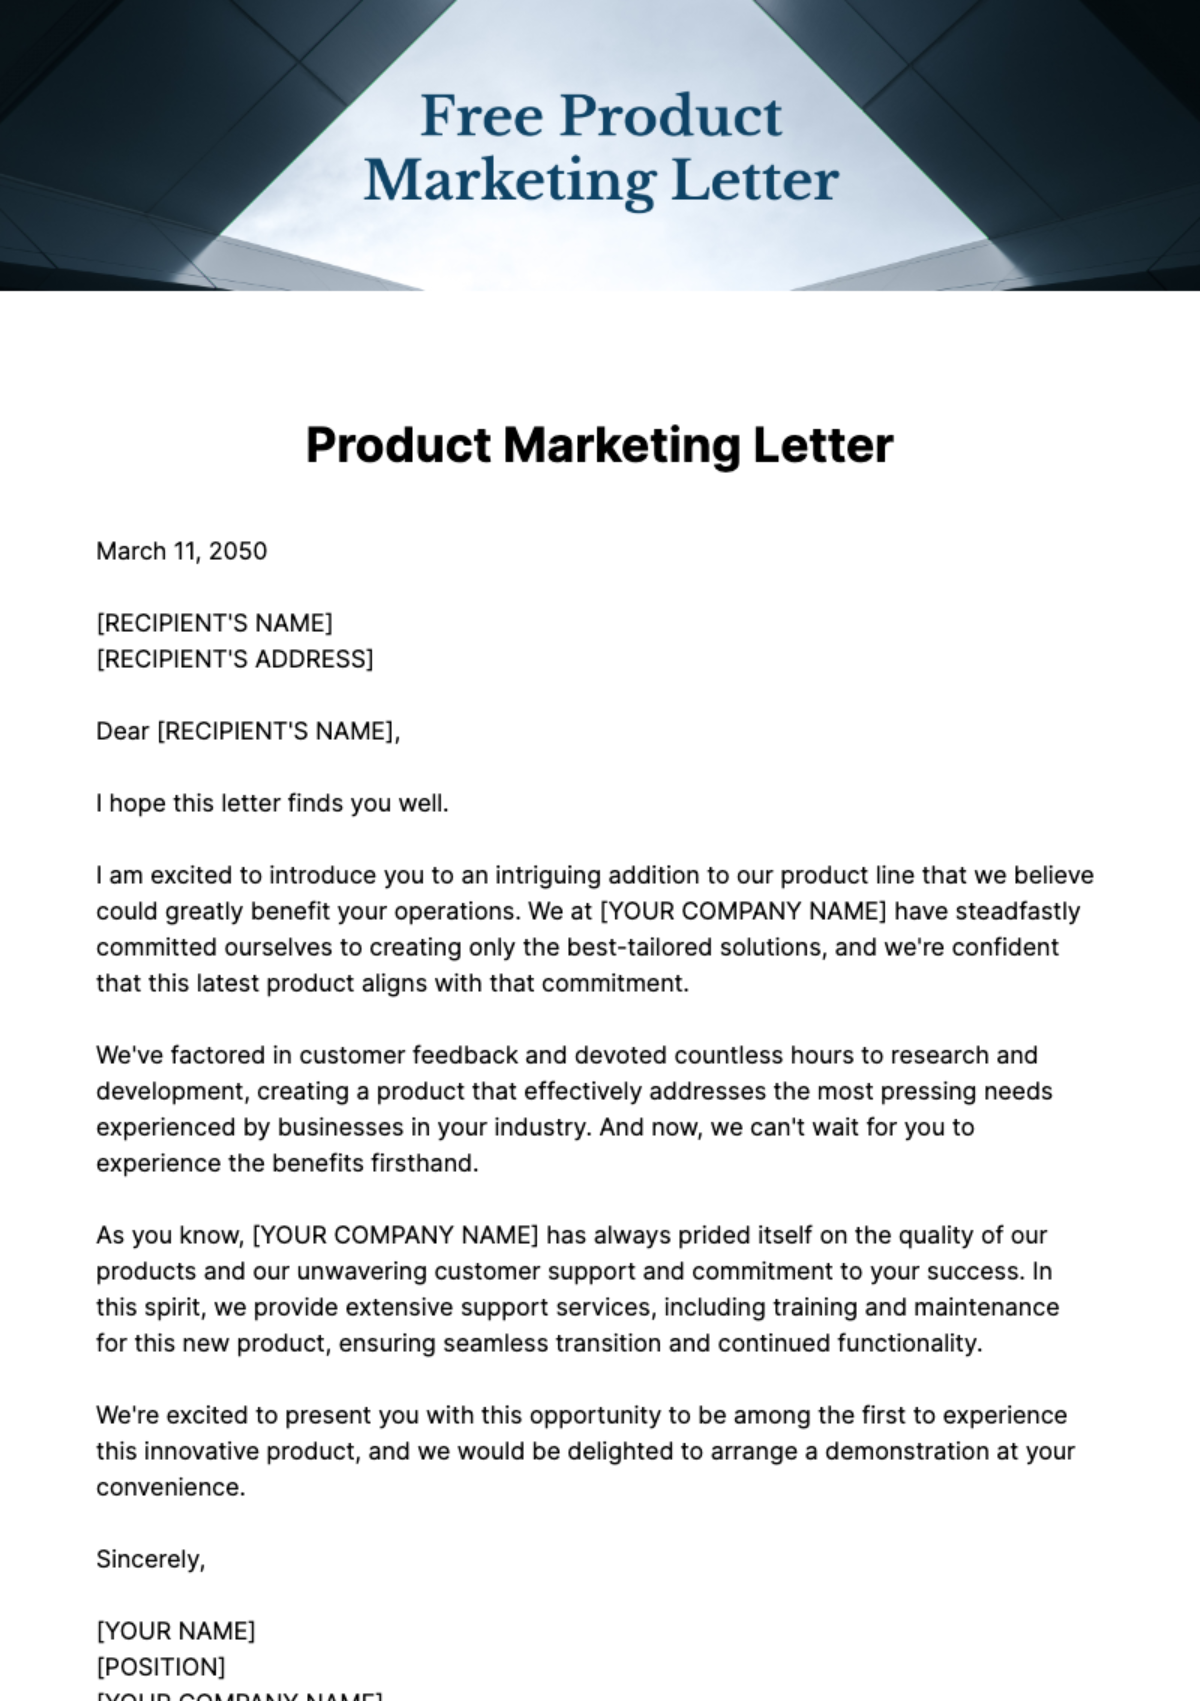 Free Product Marketing Letter Template